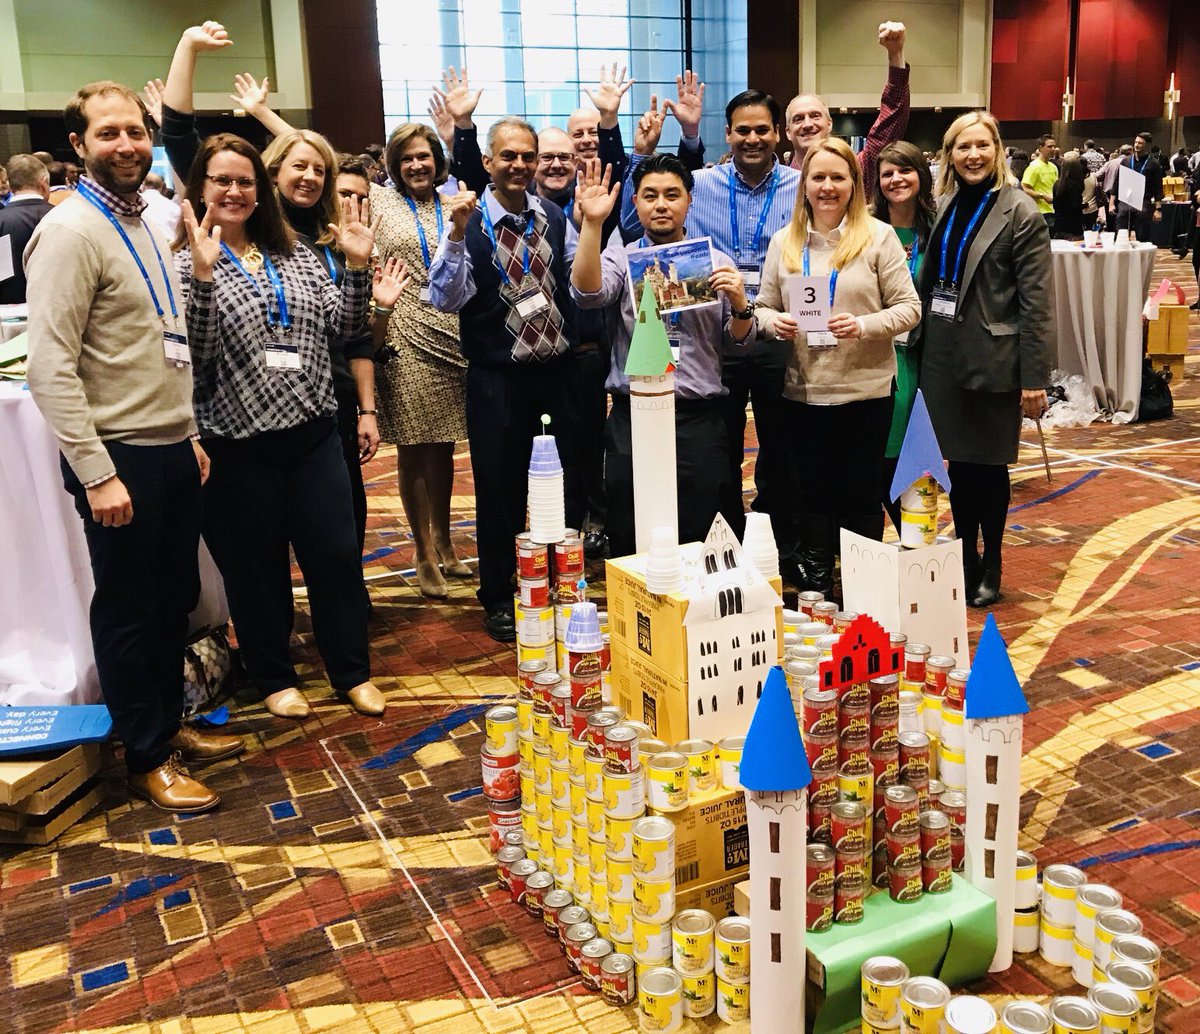 We may not have won, but we built something special at #Connections2019.  I hope everybody is as energized as I am to be part of making 2019 truly about making our customers feel great when they fly with us.  @weareunited #beingunited